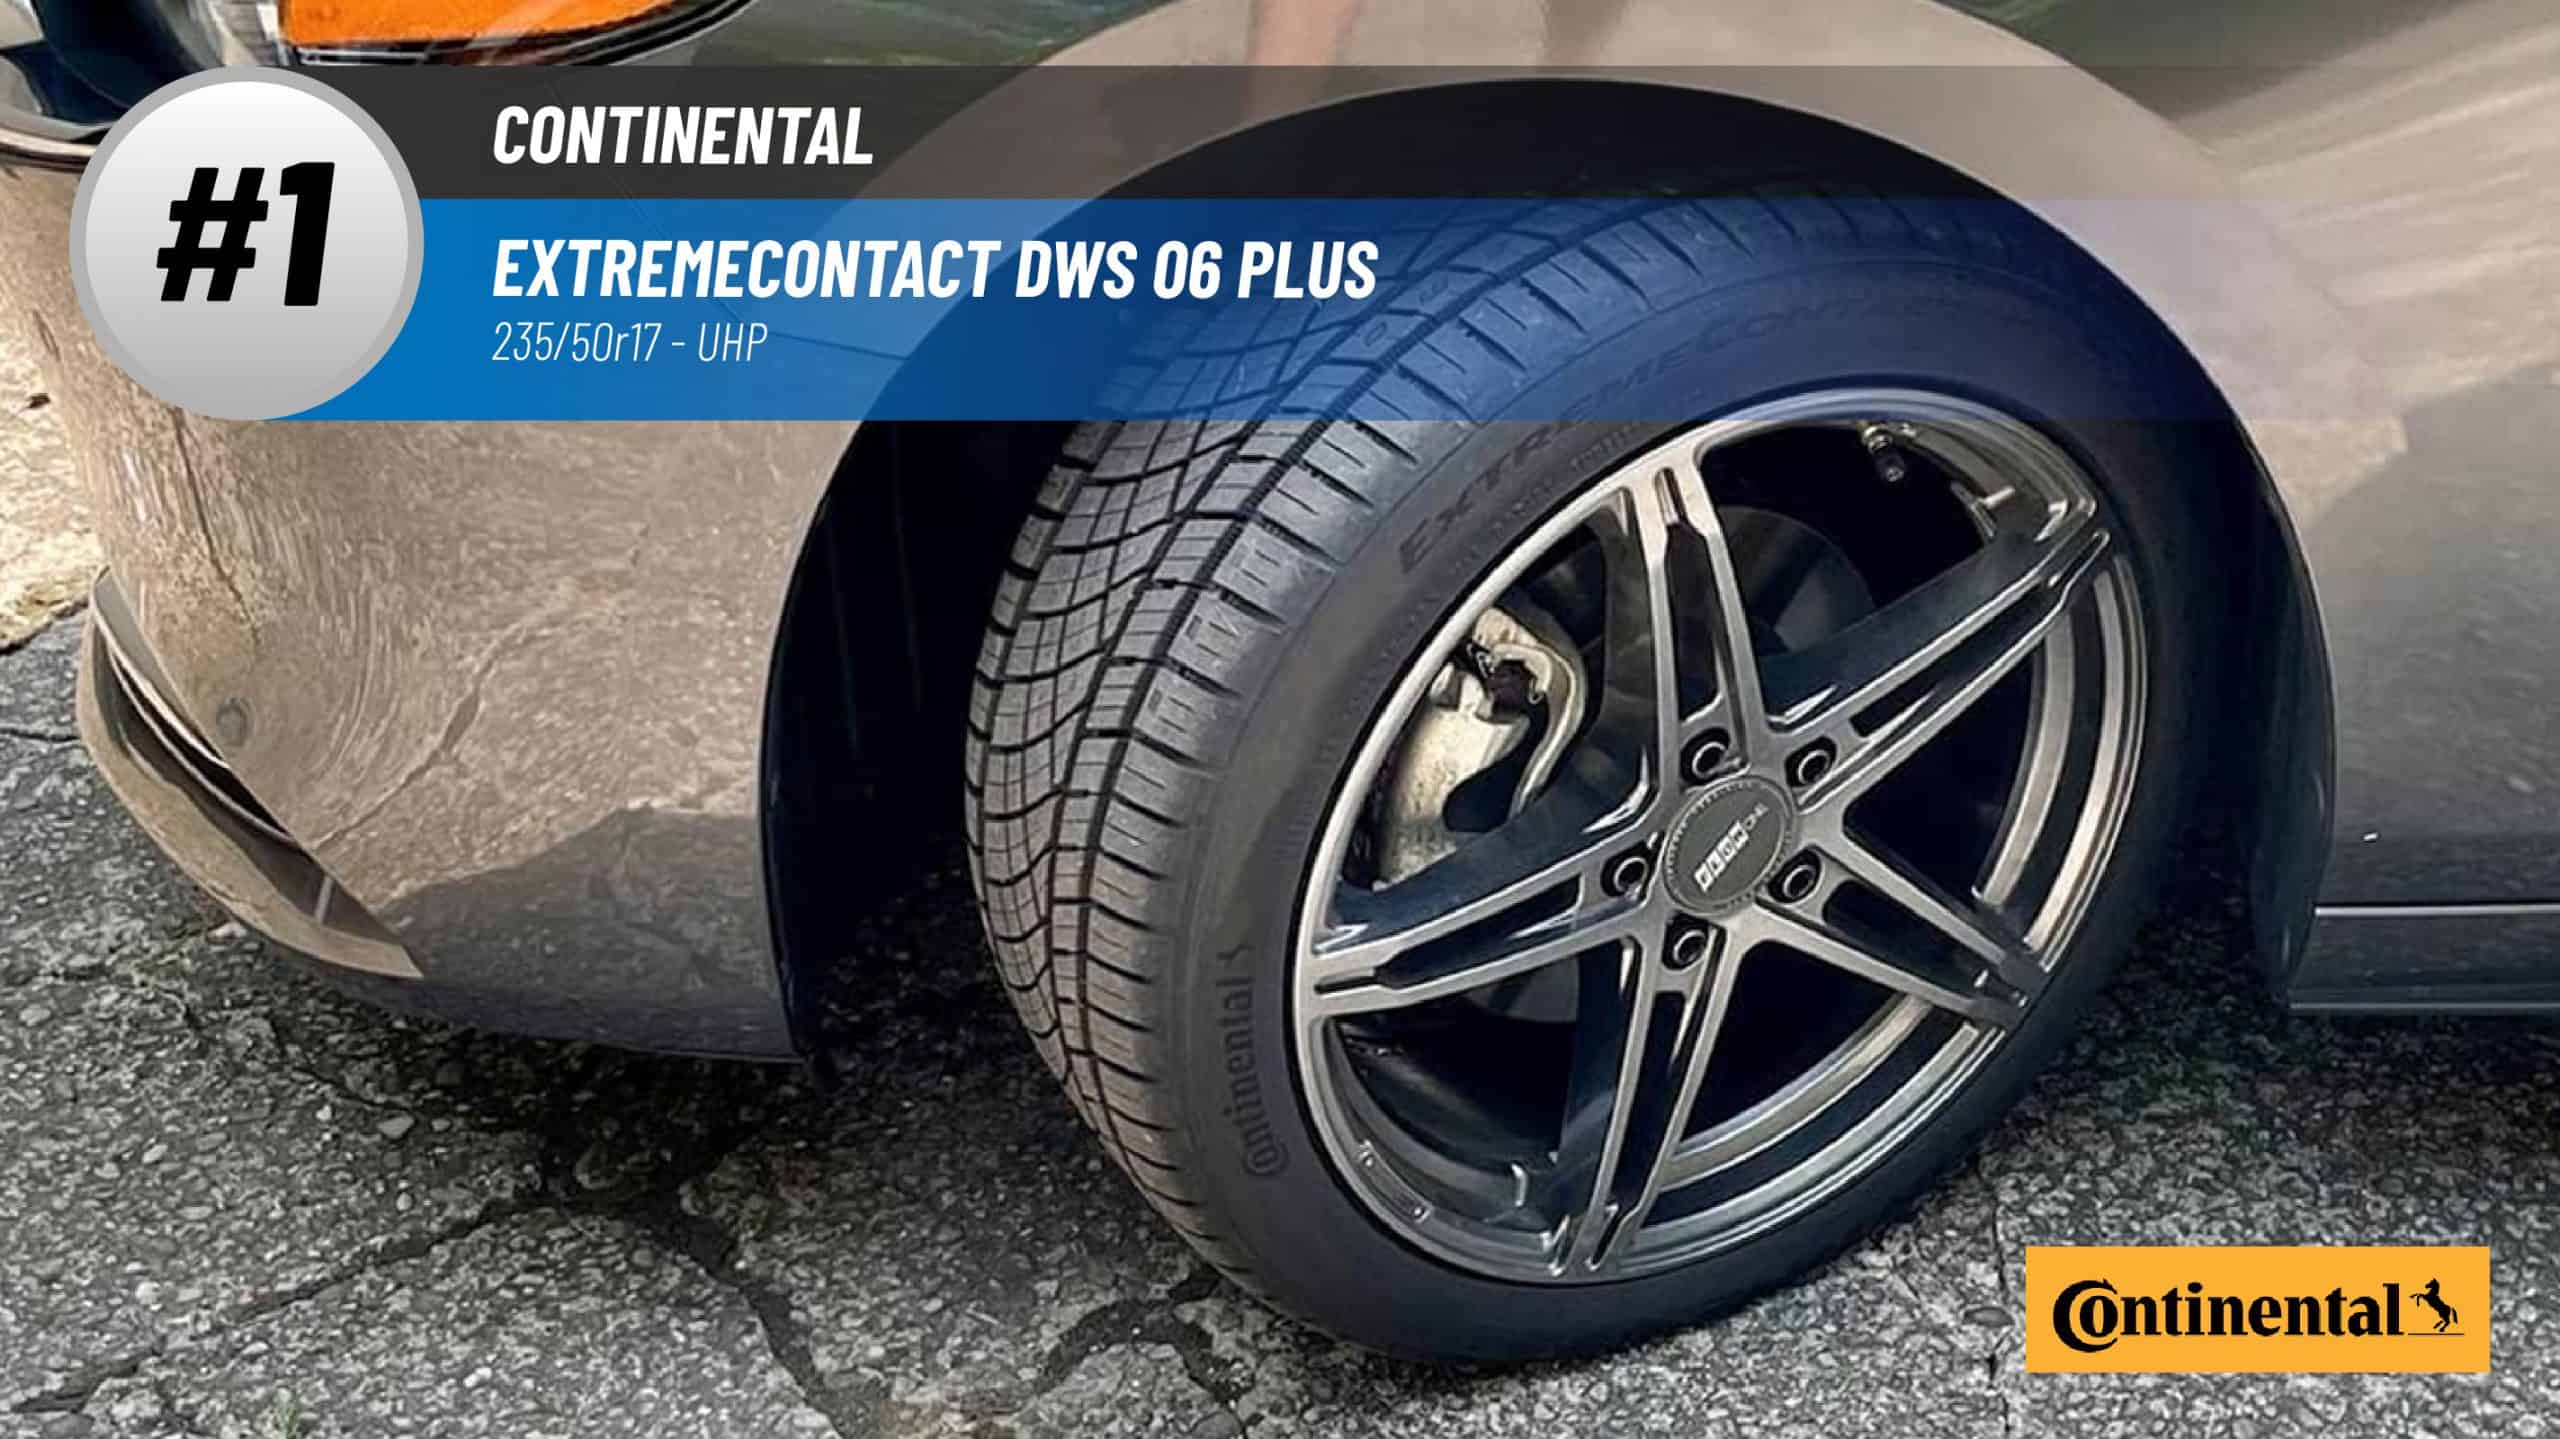 Top #1 UHP Tires: Continental ExtremeContact DWS 06 Plus – 235/50R17